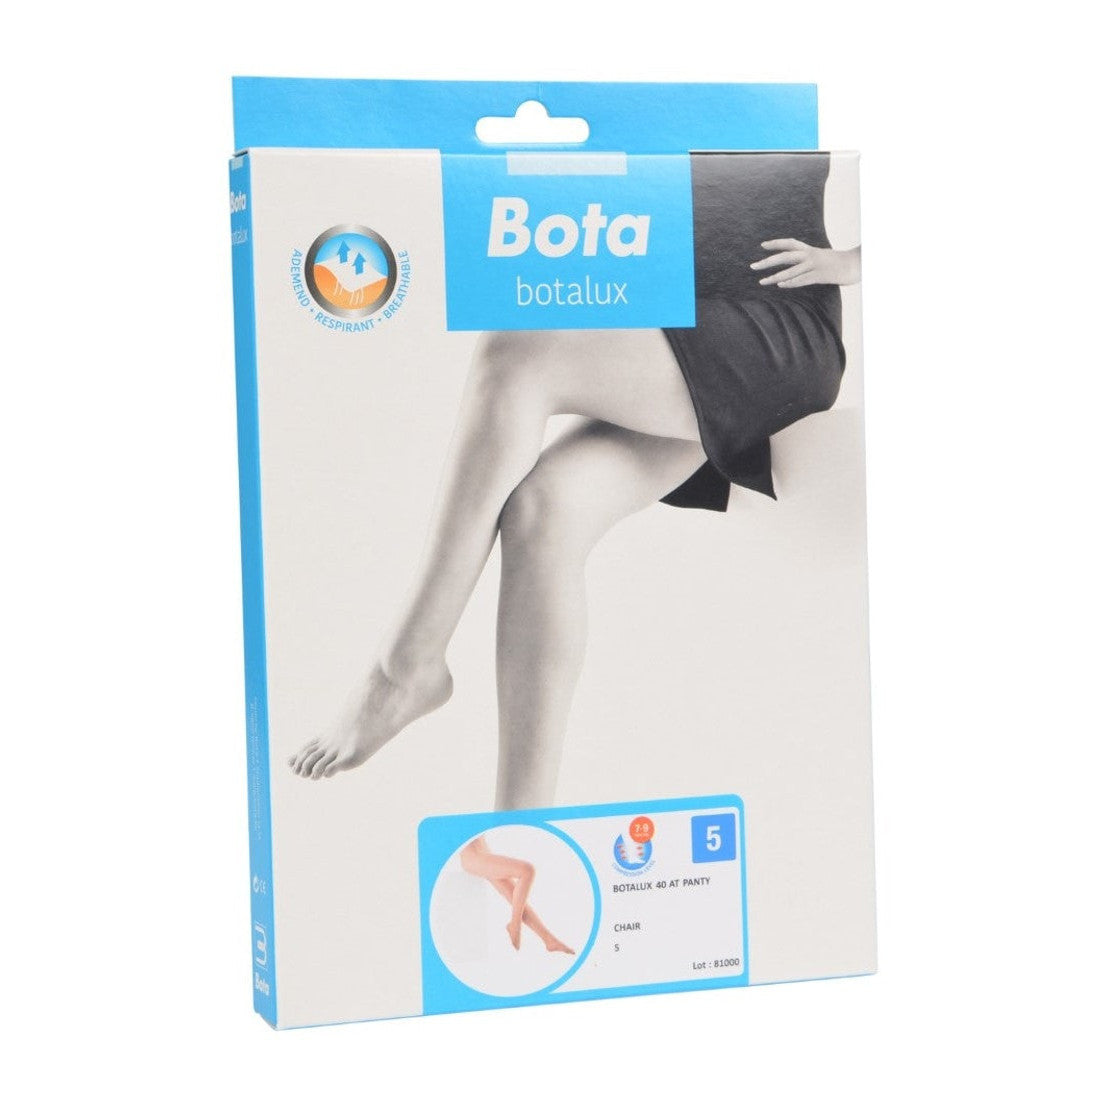 Botalux 40 support tights at ch skin color